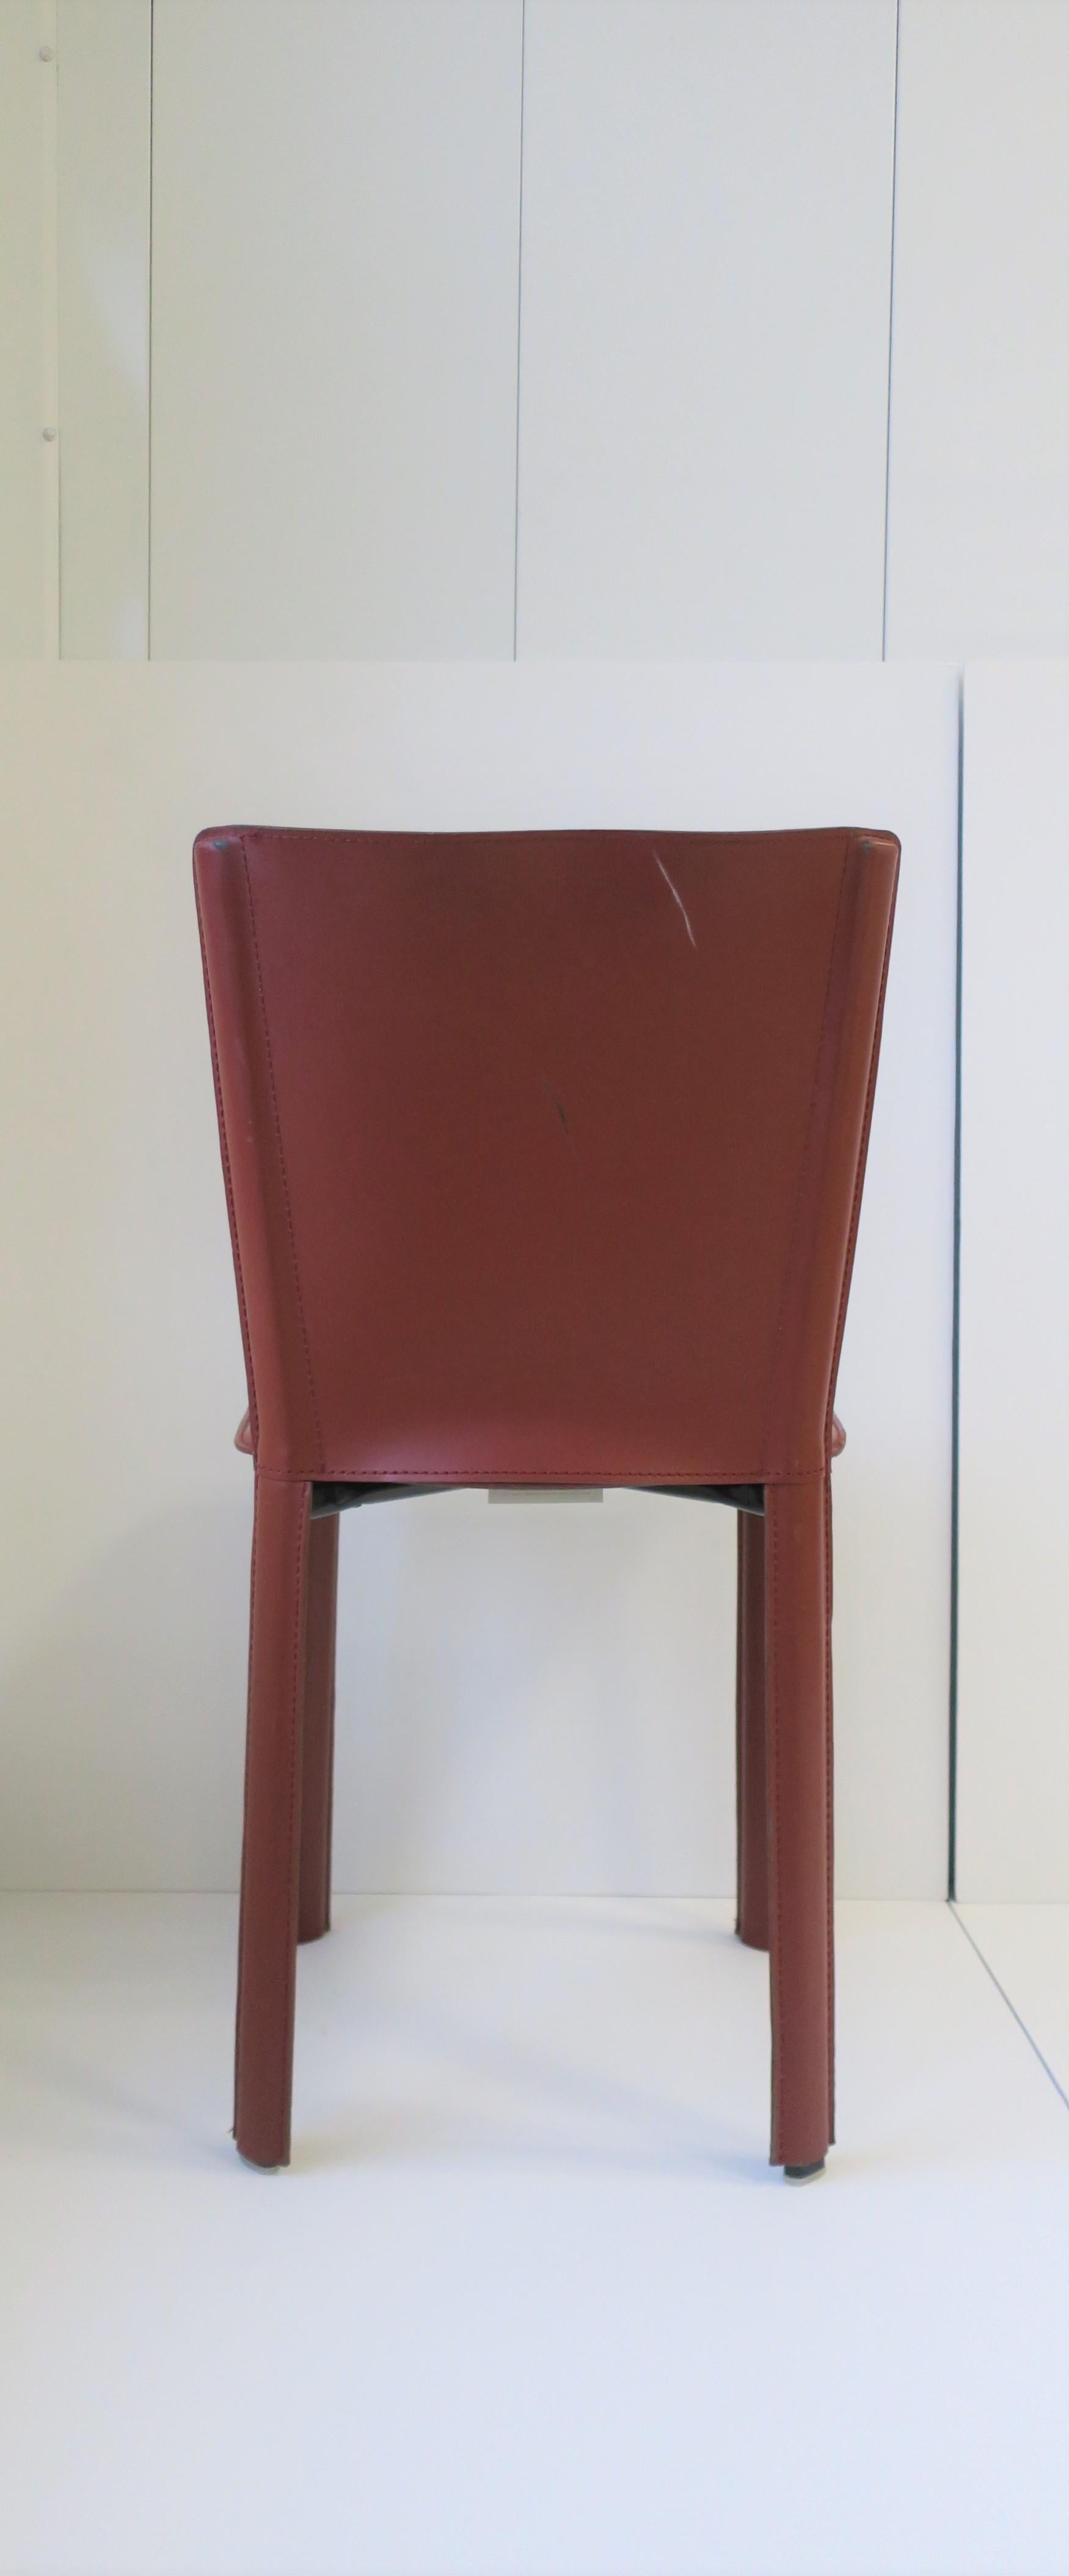 Contemporary Designer Italian Red Burgundy Leather Side or Desk Chair by Frag